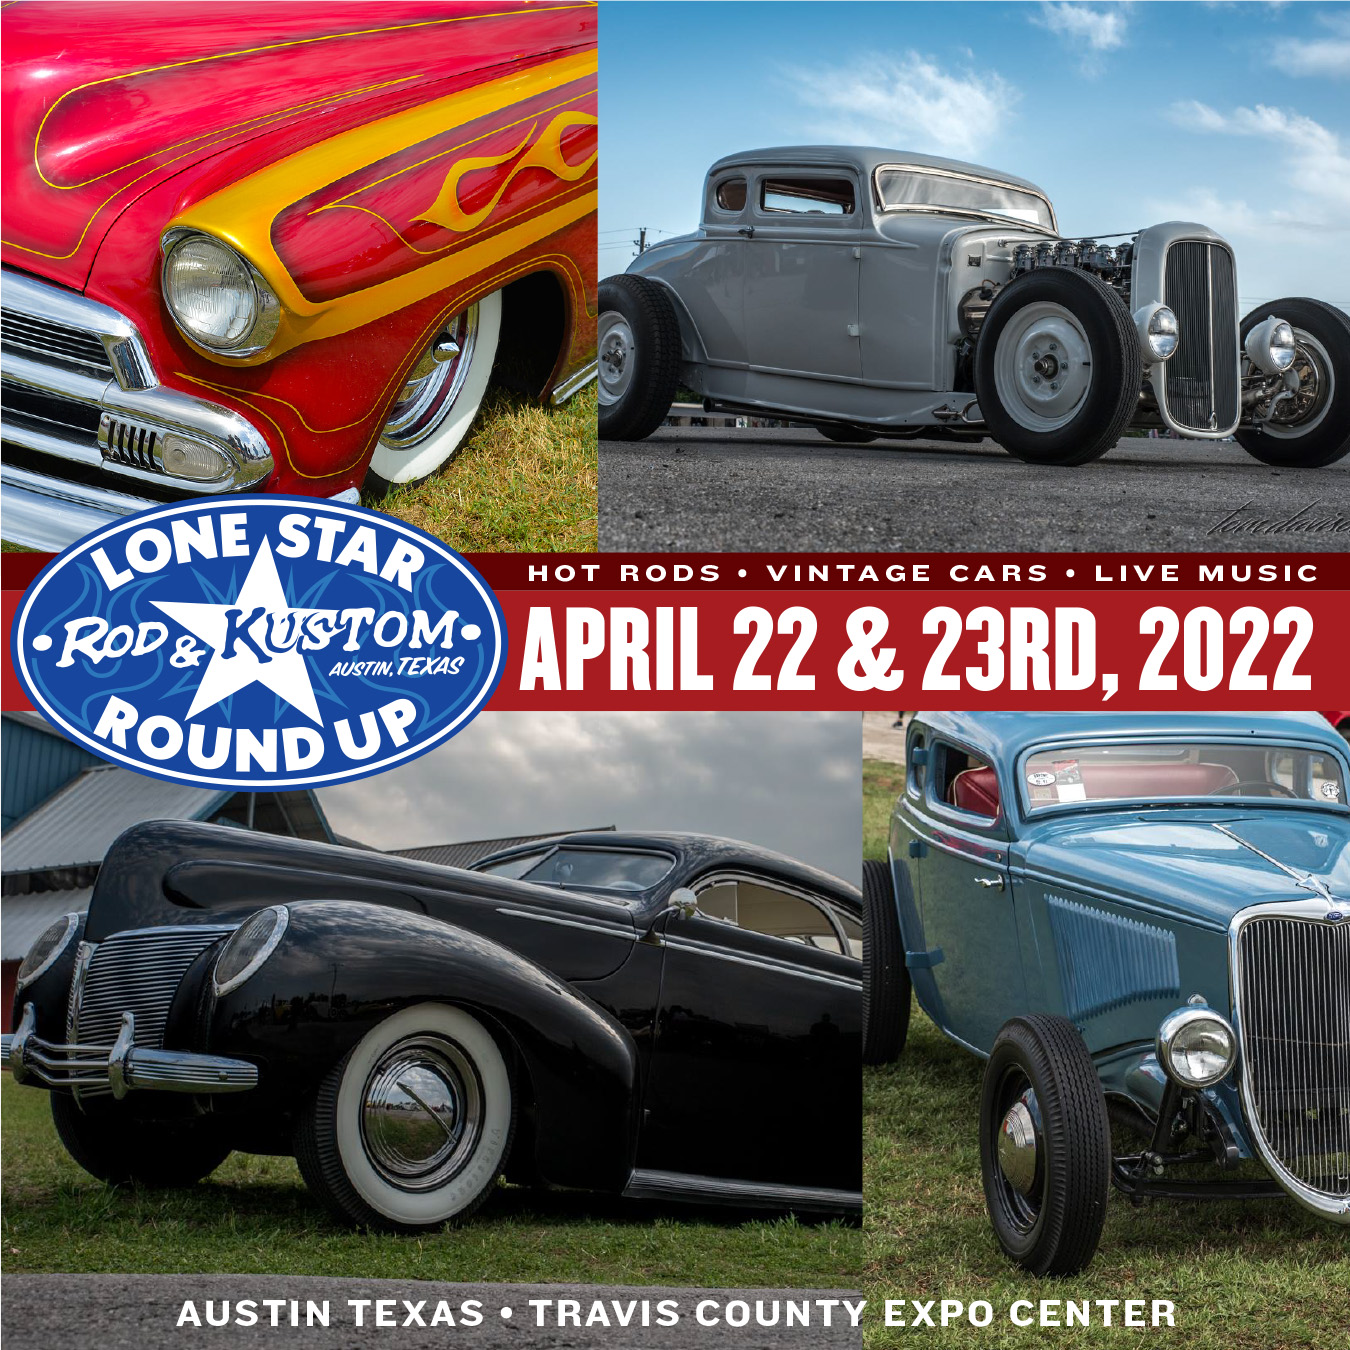 The Annual Lonestar Round Up is Back! Austin Speed Shop